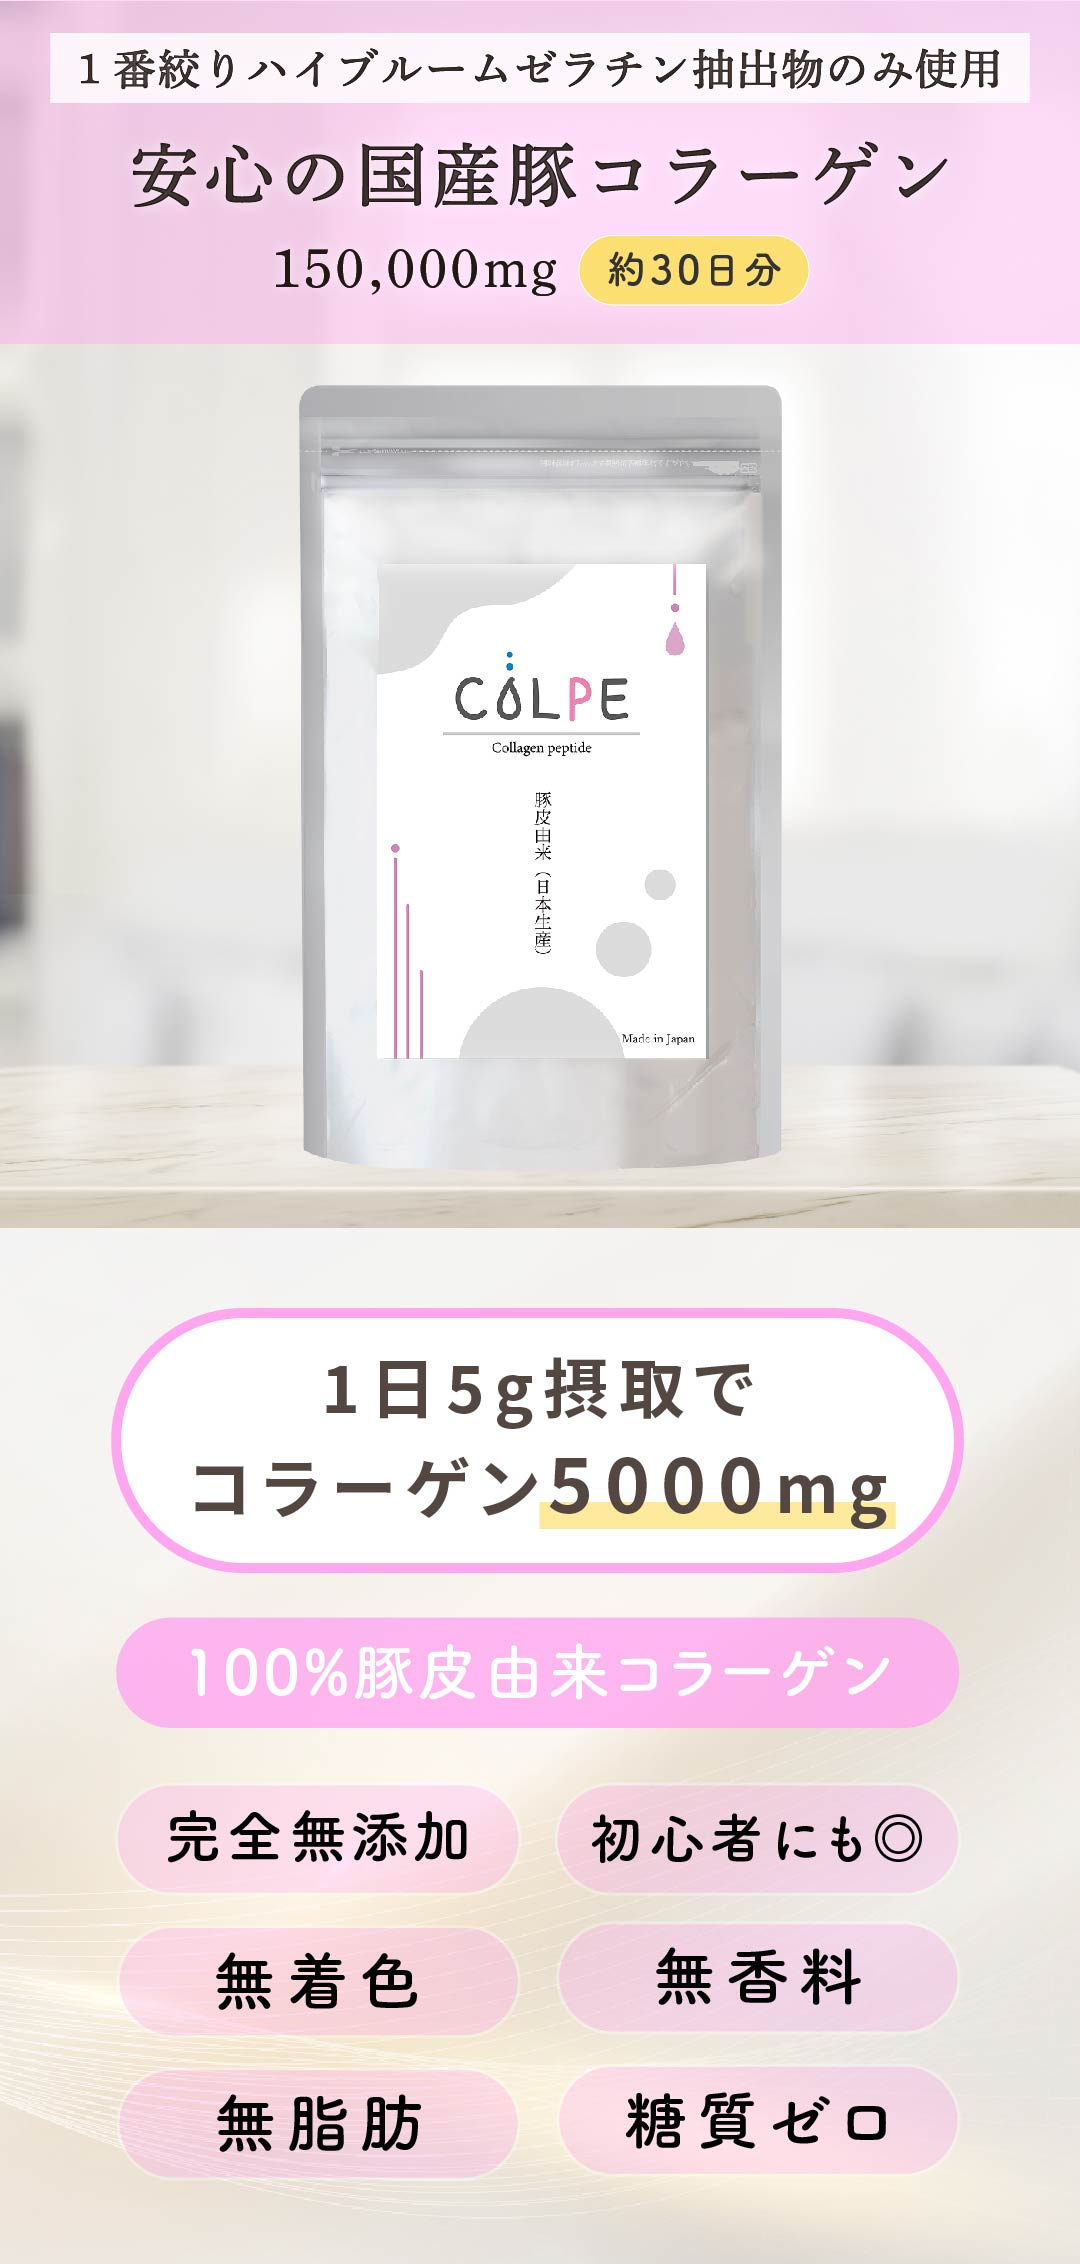 COLPE豚皮由来 ドイツ生産